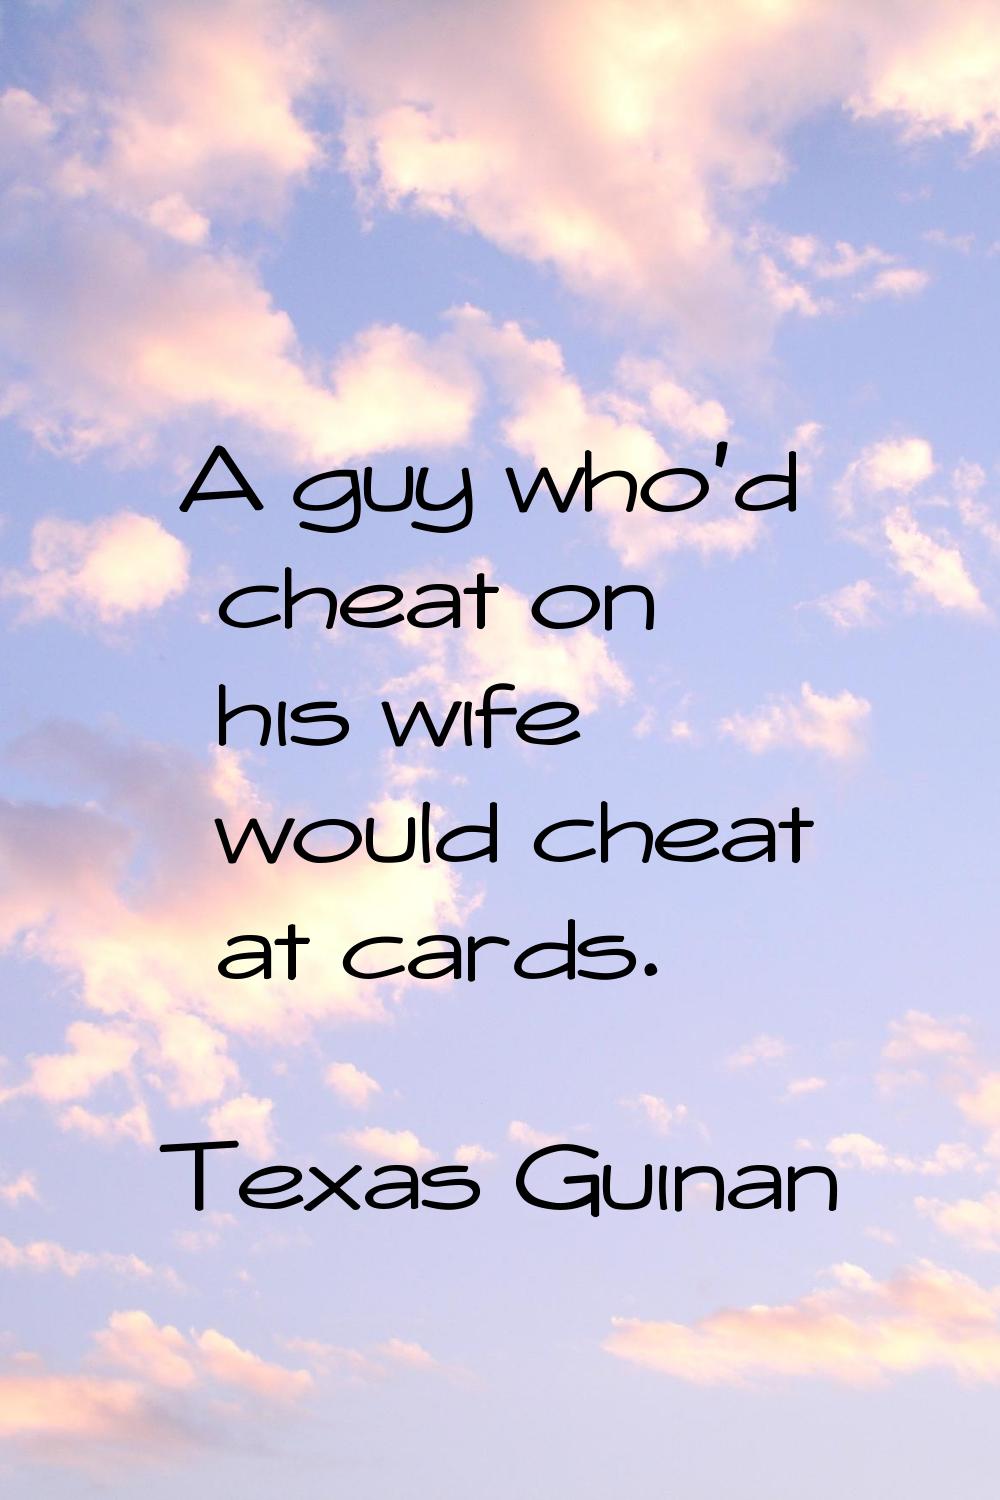 A guy who'd cheat on his wife would cheat at cards.